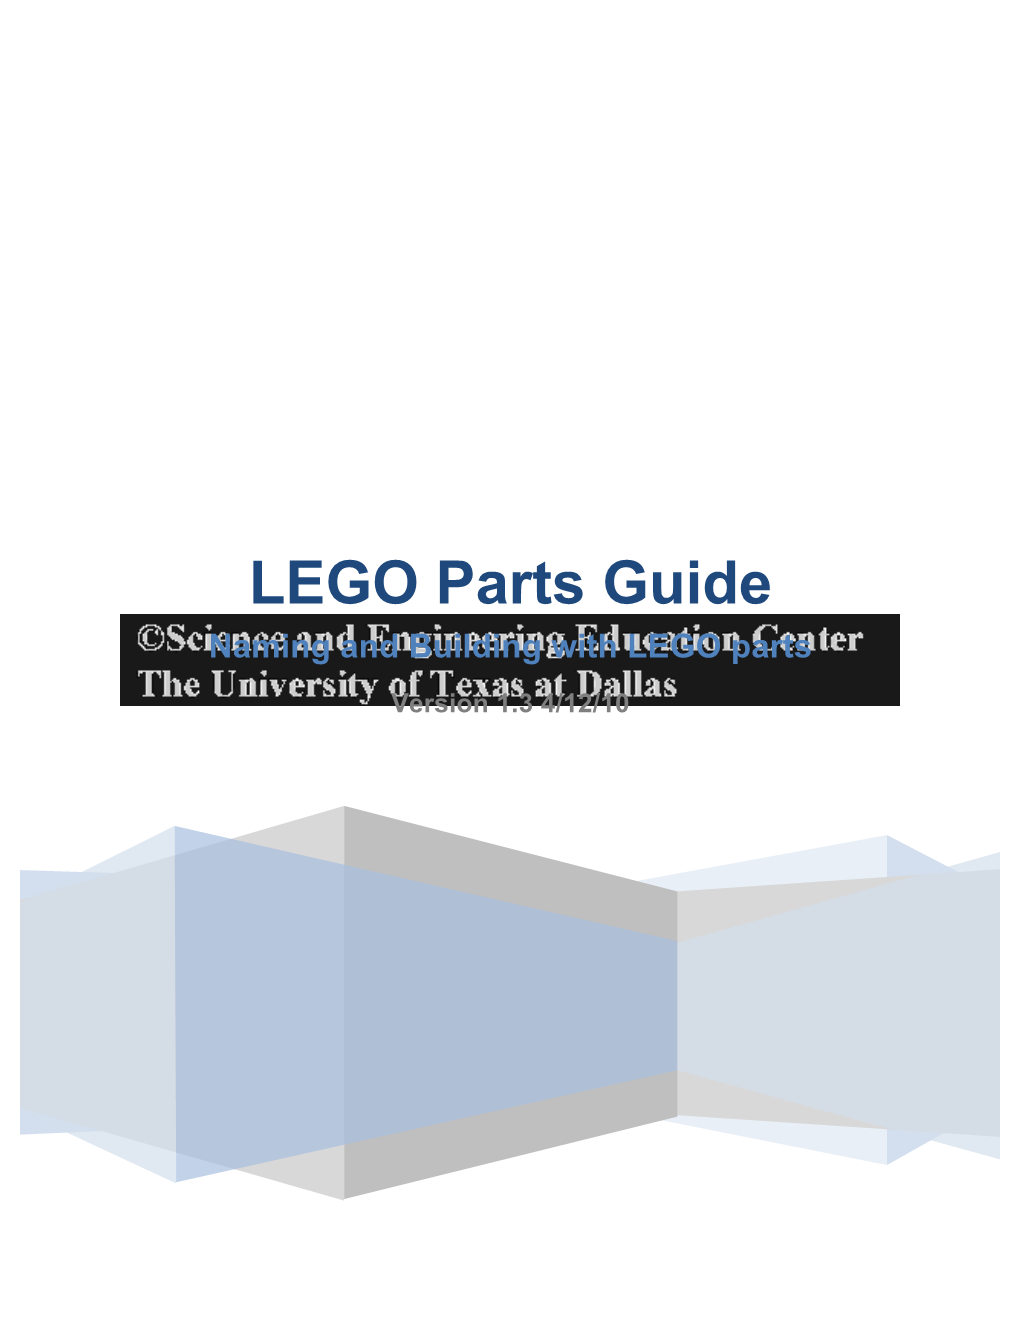 LEGO Parts Guide Naming and Building with LEGO Parts